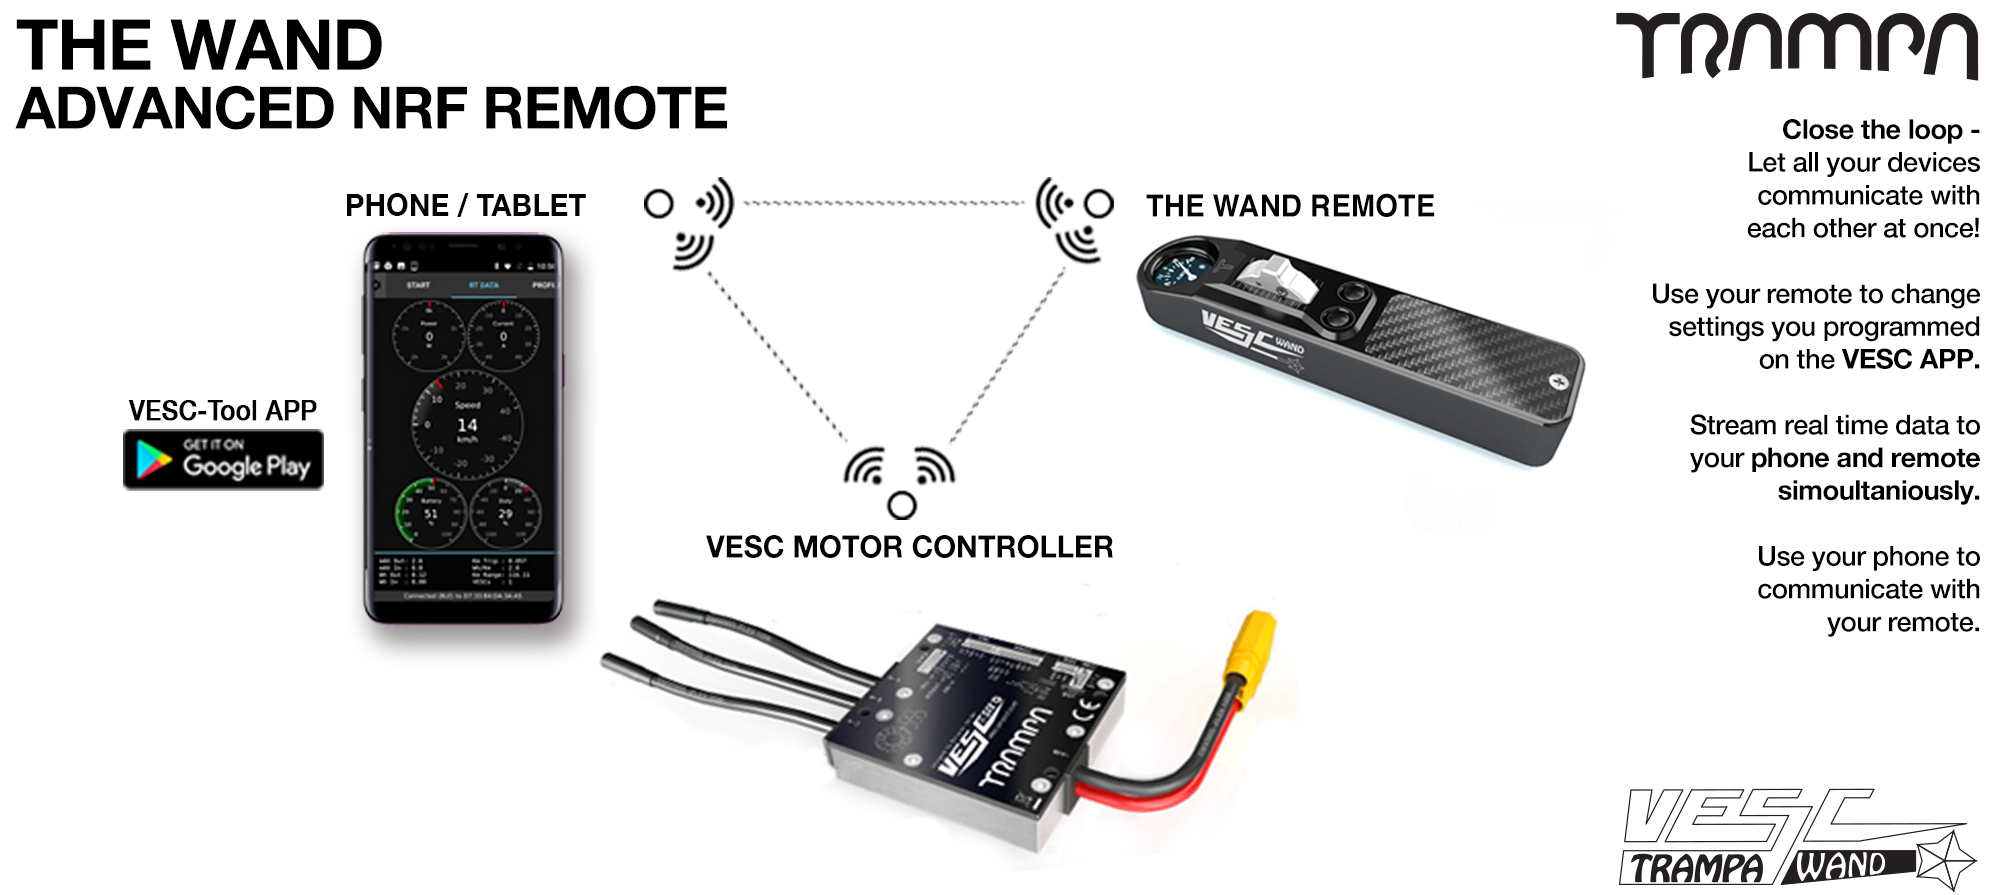 TRAMPA WAND Remote Control - VESC Based remote gives all the control you could ever wish for